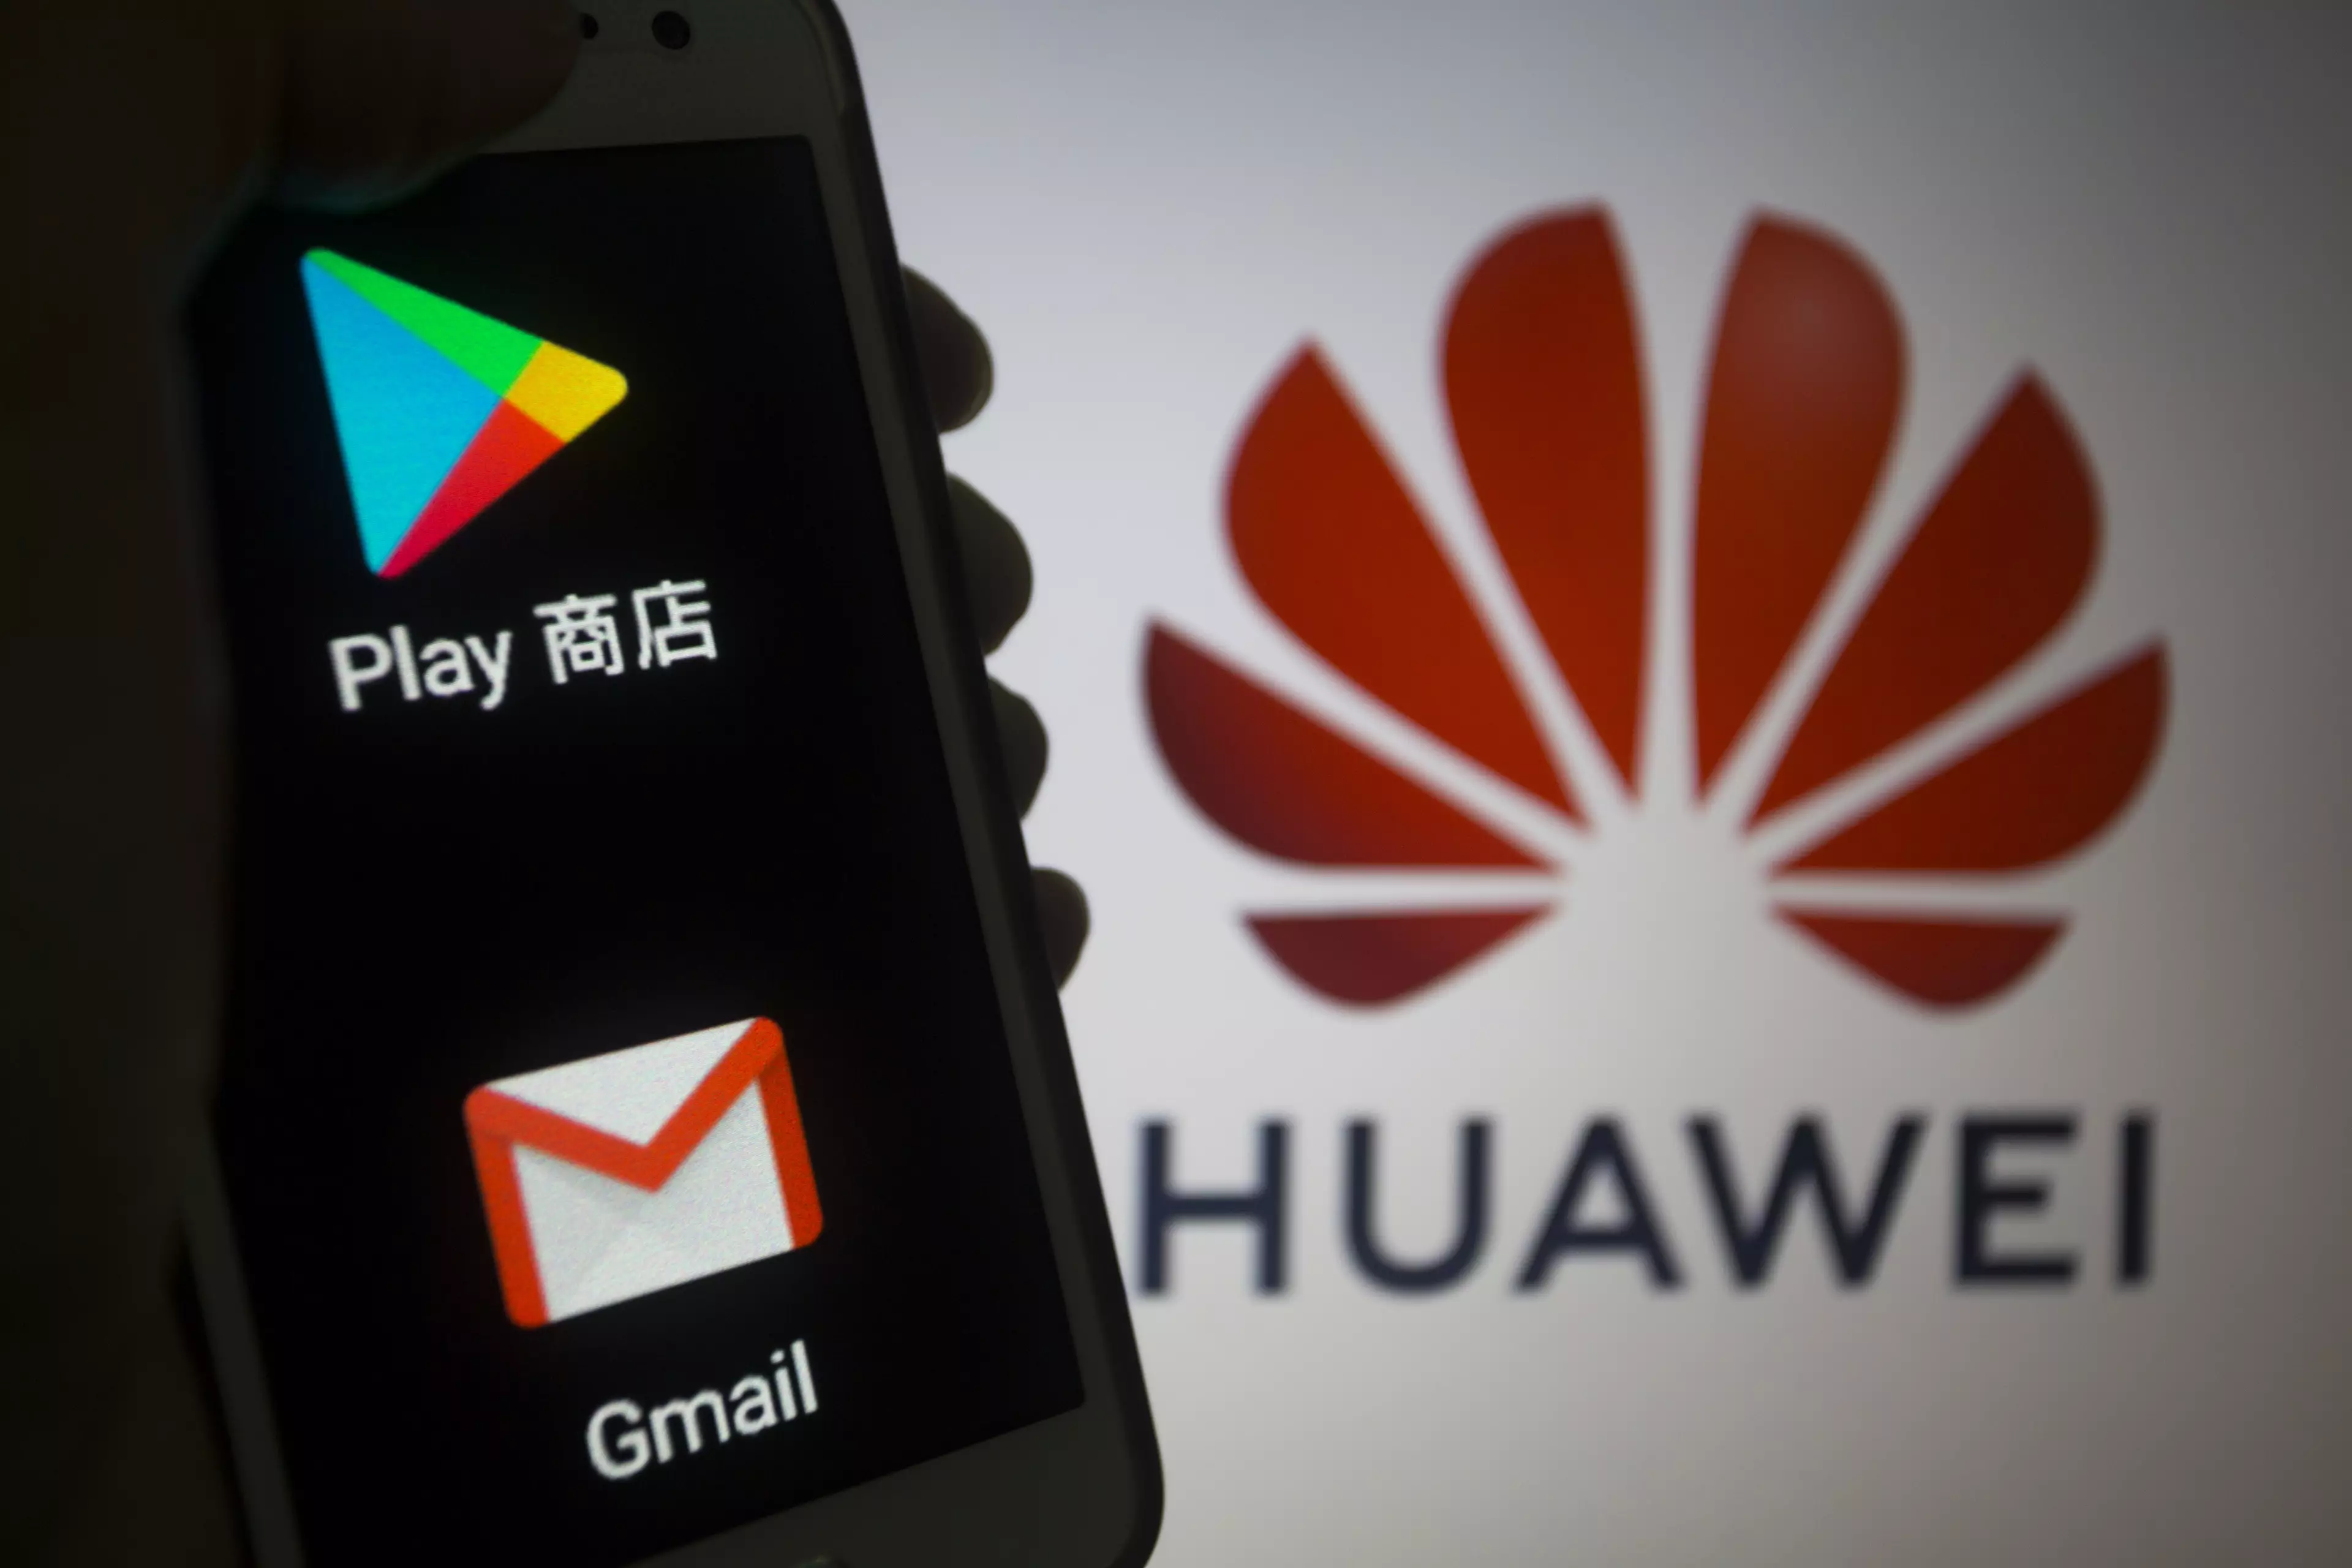 The Chinese firm has reportedly been banned from future updates by Google.